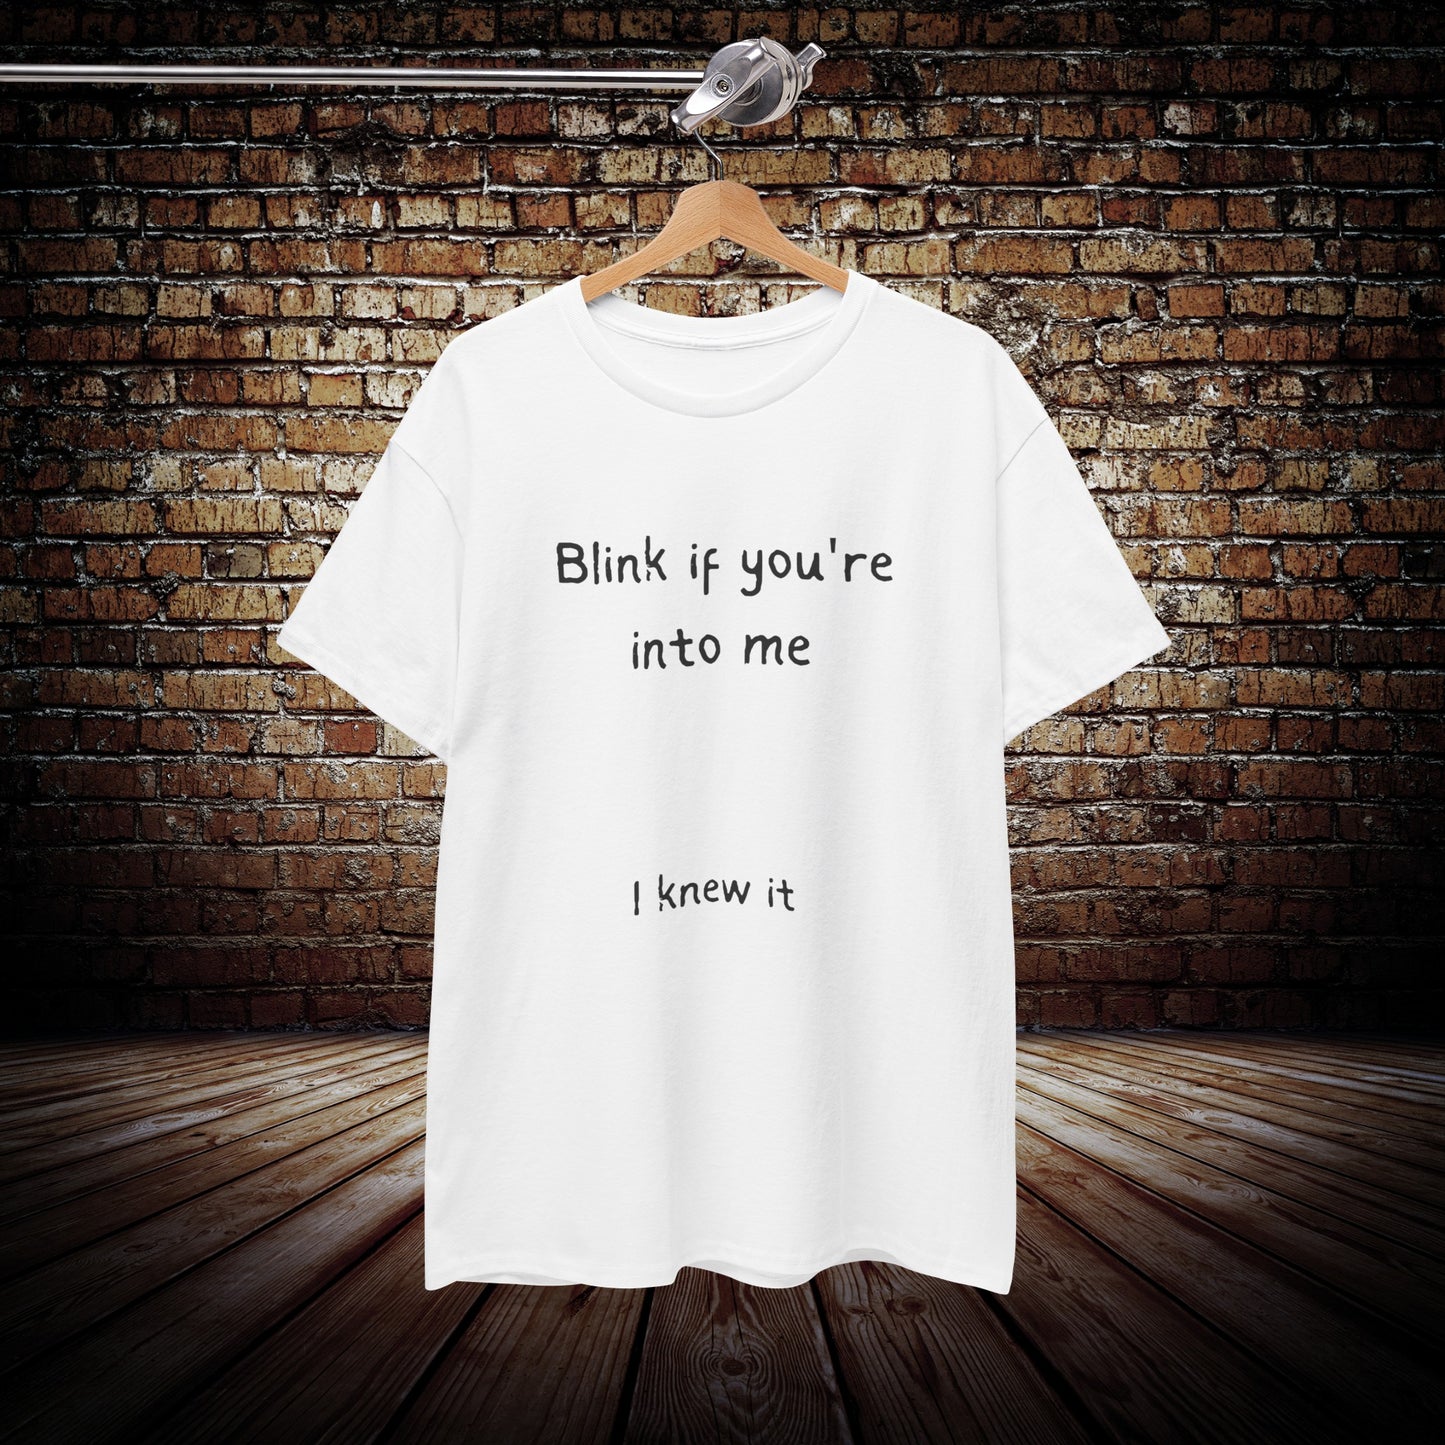 Blink if you're into me shirt